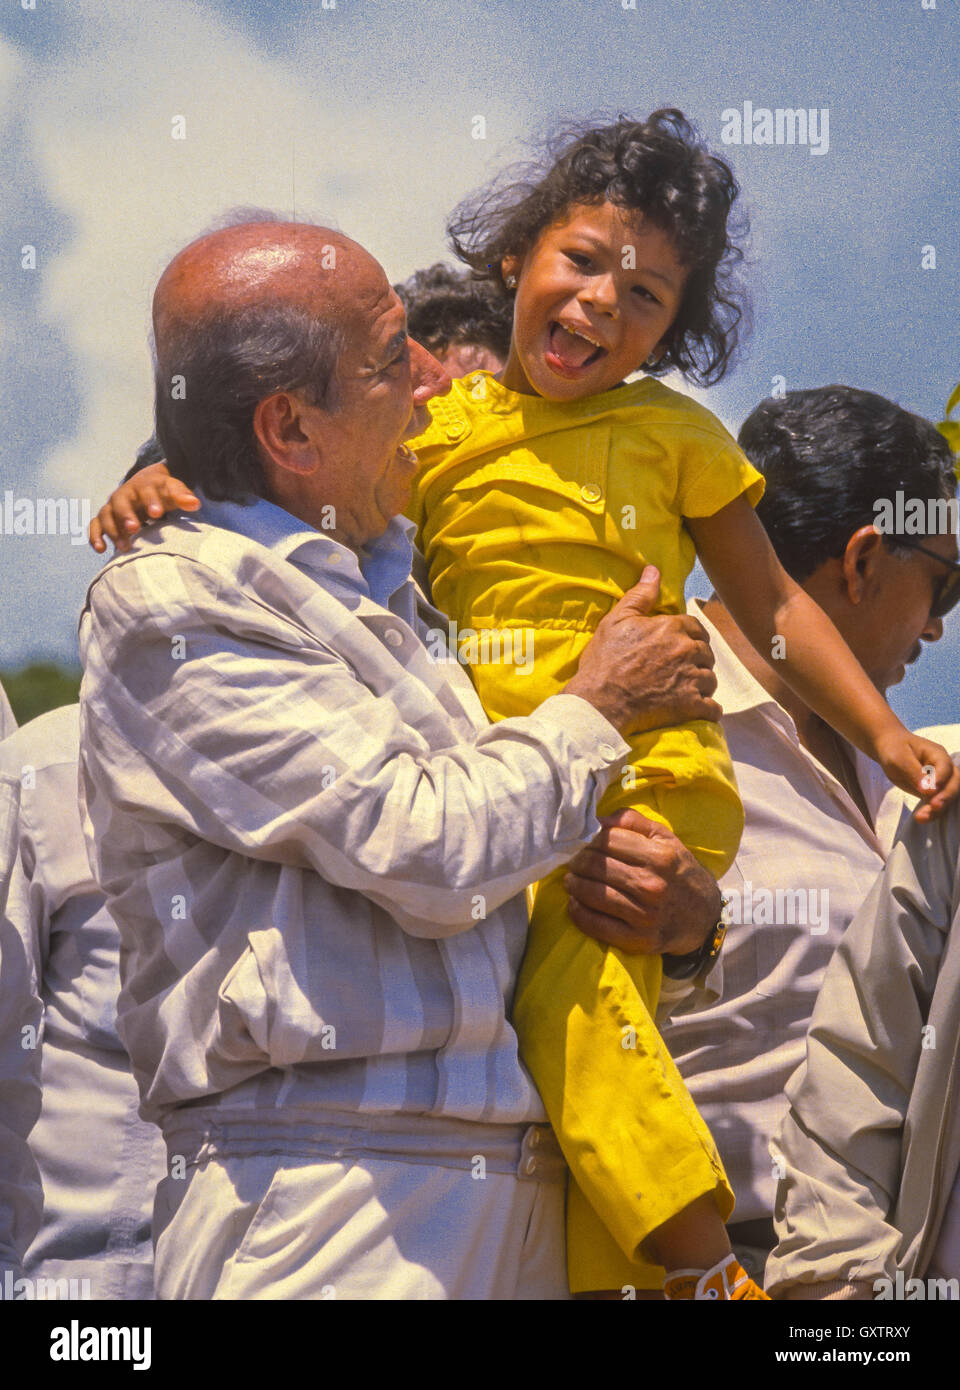 CIUDAD GUAYANA, VENEZUELA - Presidential candidate Carlos Andres Perez campaigning, picks up young girl. 1988 Stock Photo